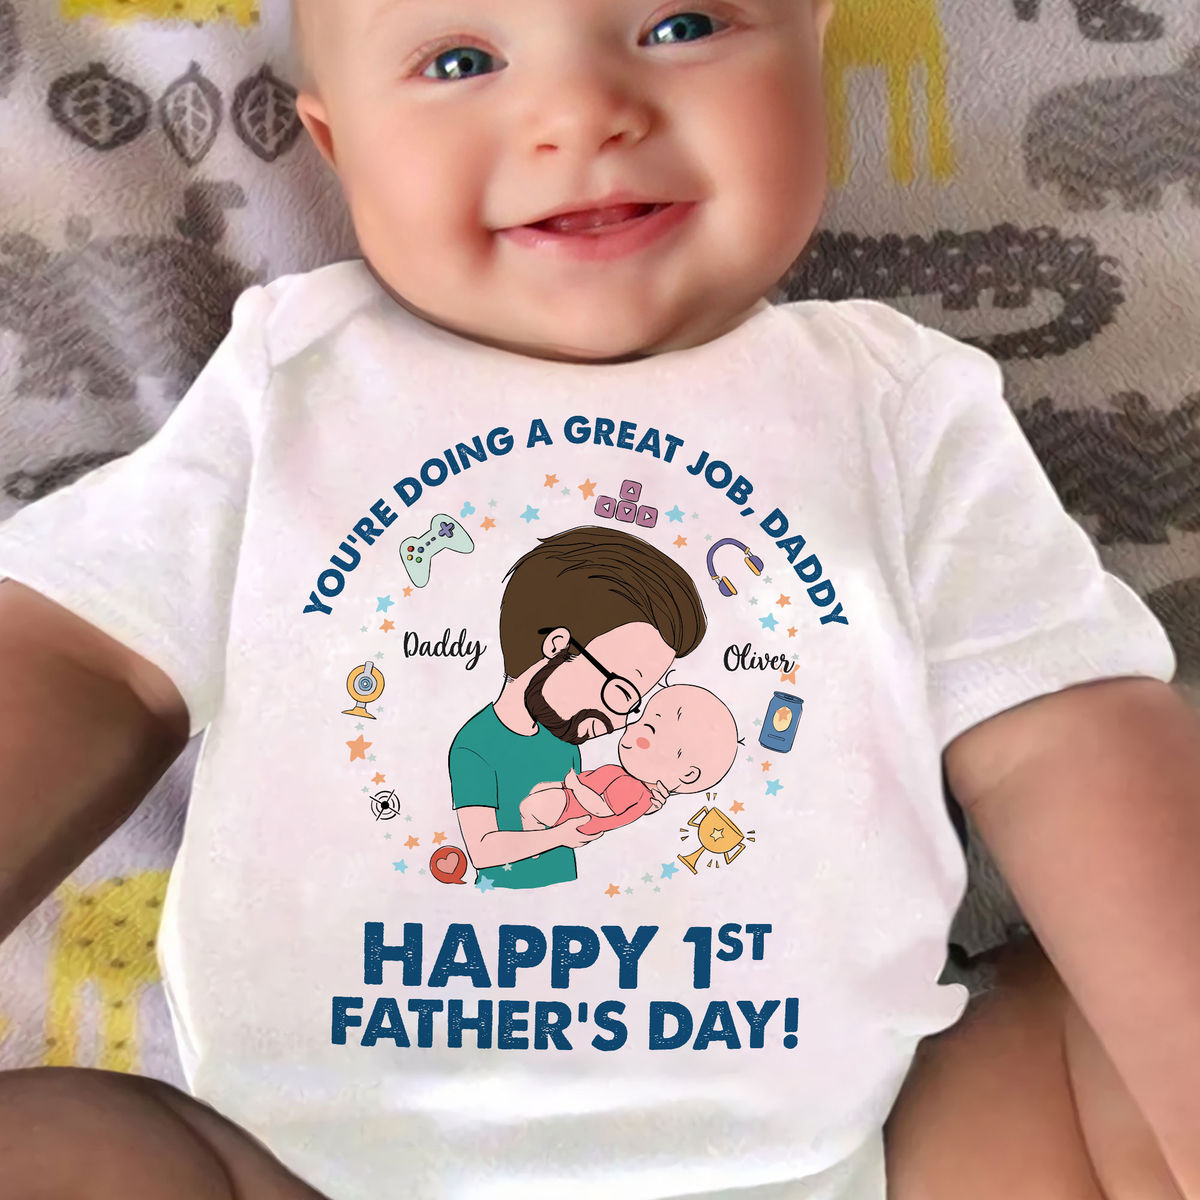 Personalized Shirt - First Father's Day Outfit - You're doing a great job Daddy - Happy 1st Father's Day